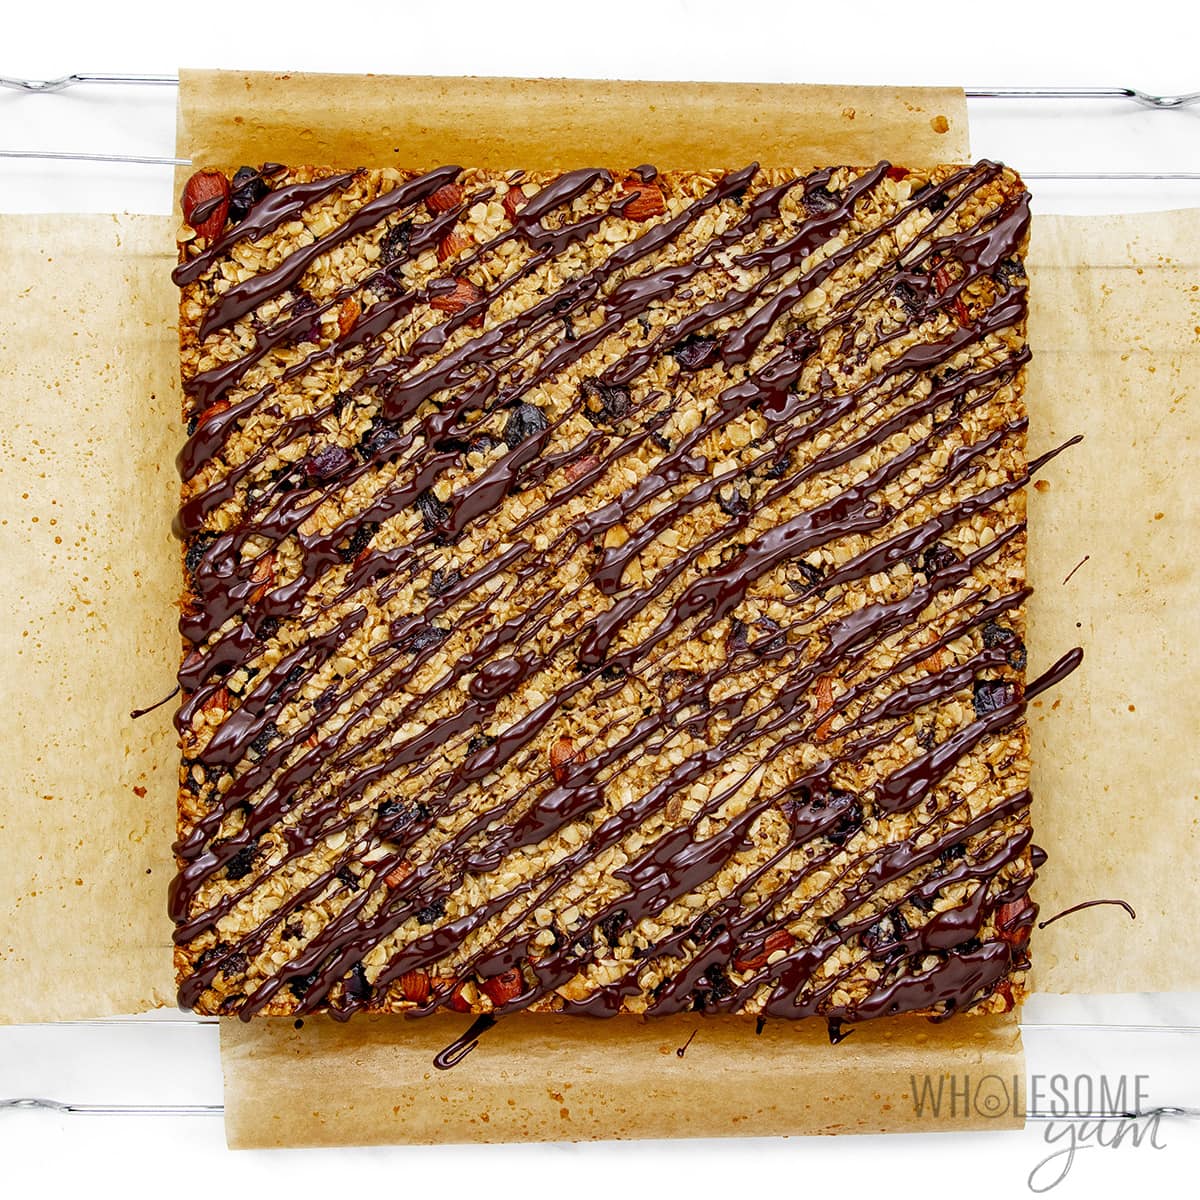 Breakfast bar slab drizzled with chocolate.